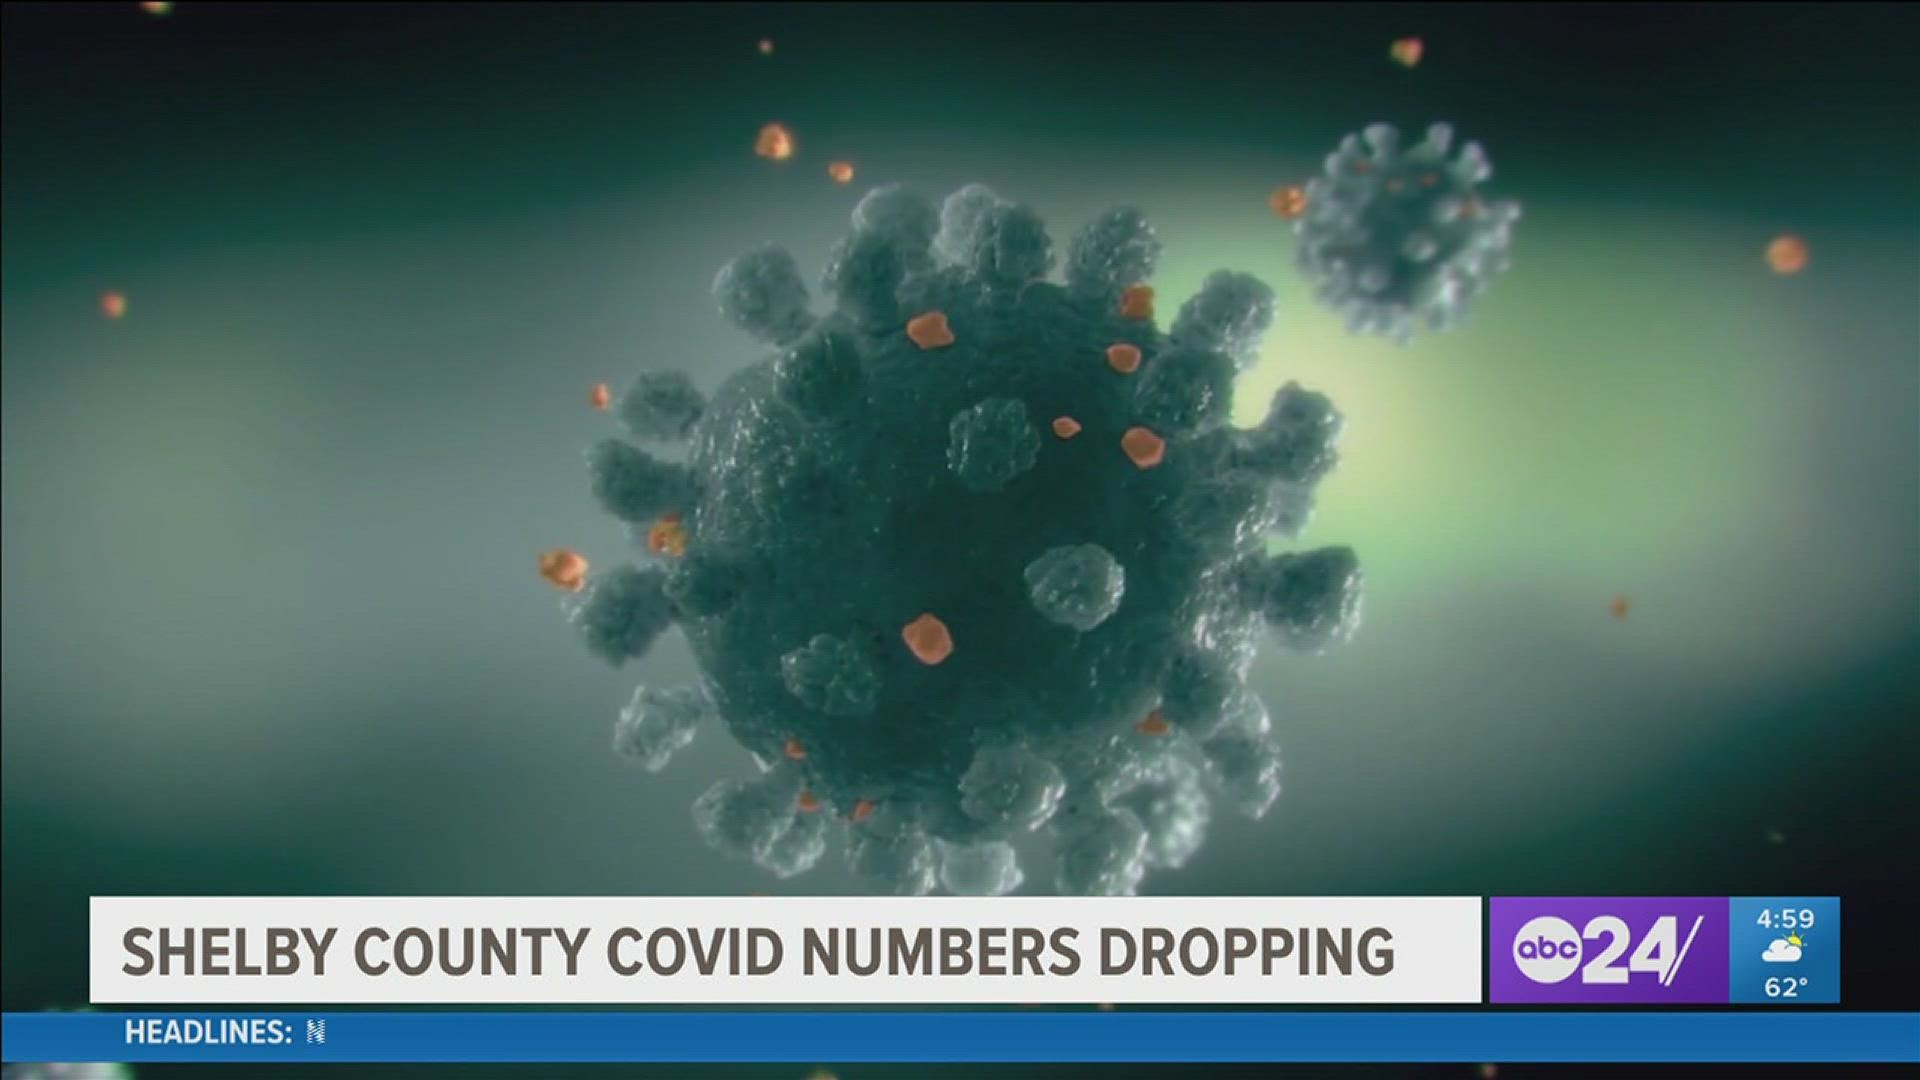 Doctors said the assessment is based on encouraging trends the past two weeks across the board in COVID data in Shelby County.